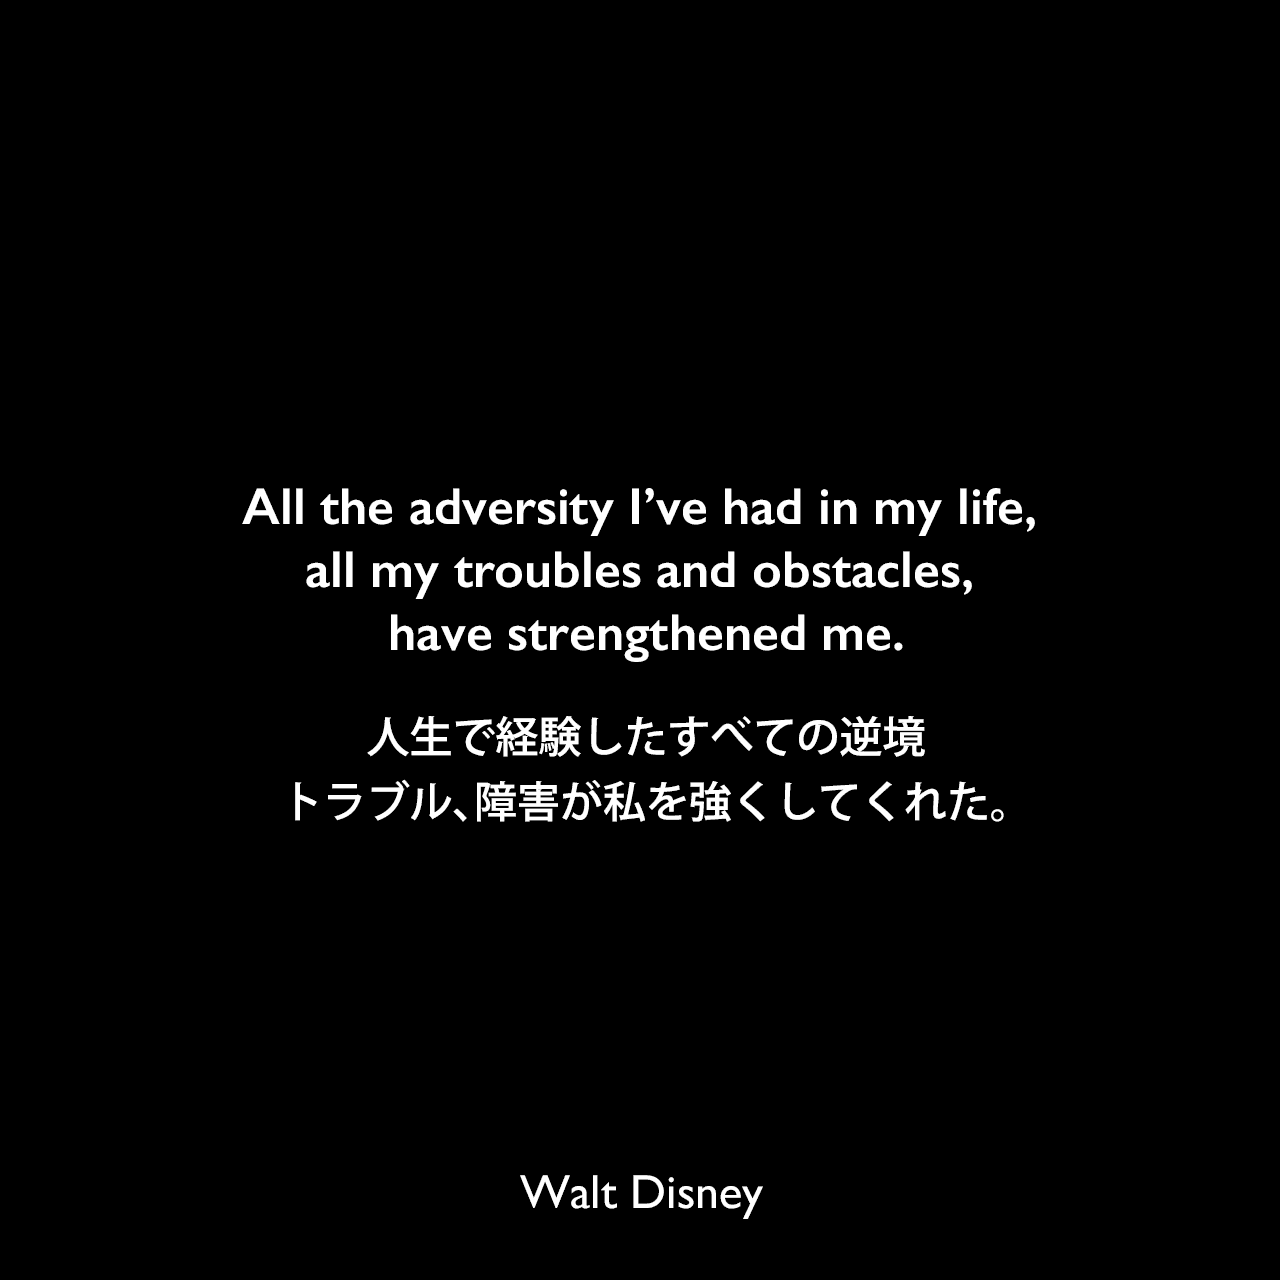 All the adversity I’ve had in my life, all my troubles and obstacles, have strengthened me.人生で経験したすべての逆境、トラブル、障害が私を強くしてくれた。- ダイアン・ディズニー・ミラーによる本「The story of Walt Disney」よりWalt Disney